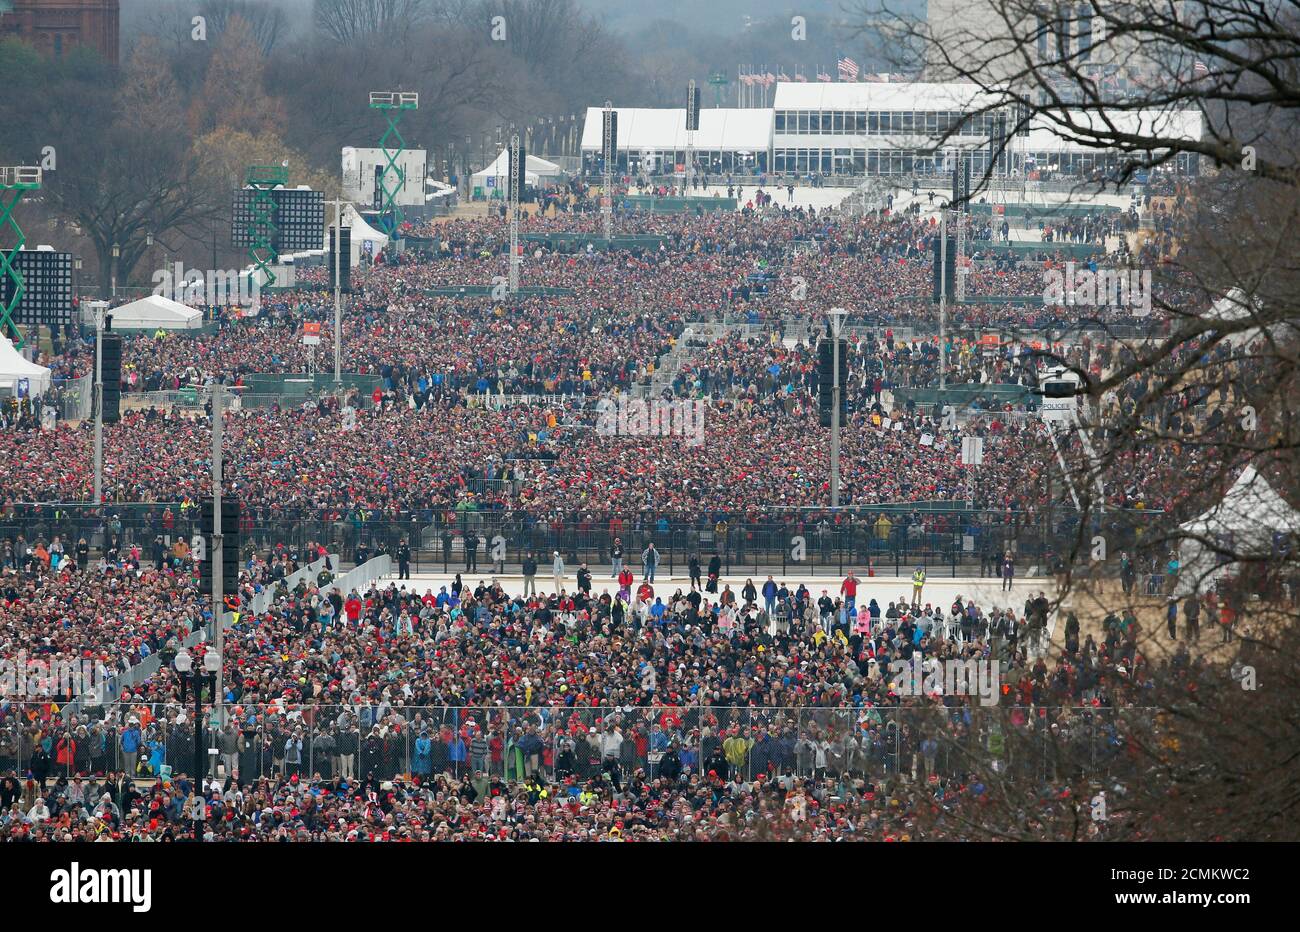 Crowds watch the inauguration ceremonies swearing in Donald Trump as the 45th president of the United States on the West front of the U.S. Capitol in Washington, U.S., January 20, 2017. REUTERS/Rick Wilking Stock Photo